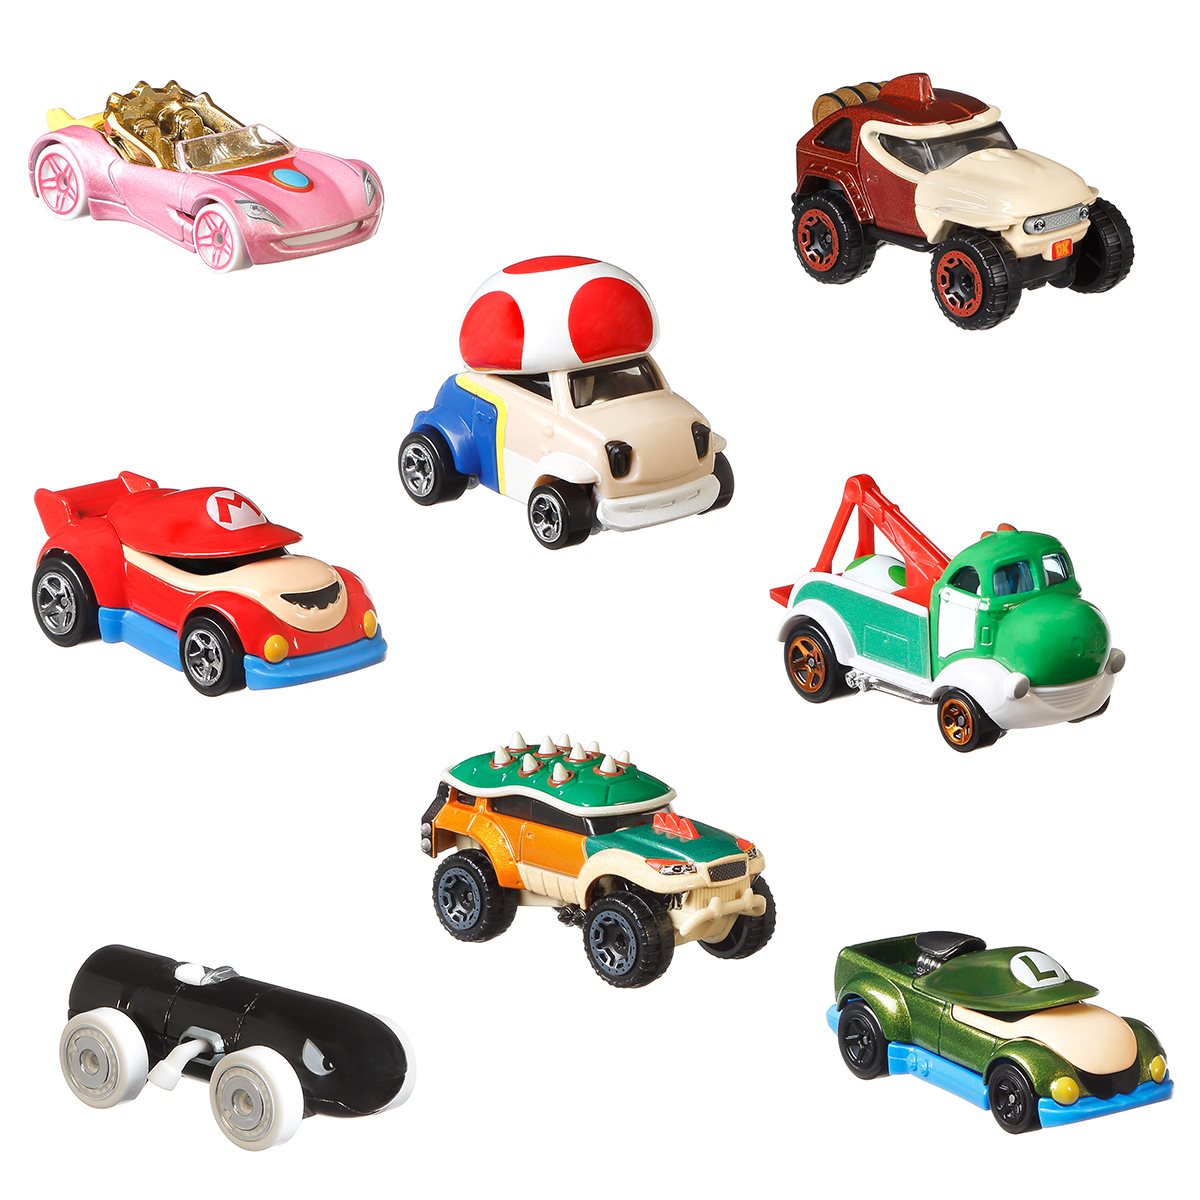 Hot Wheels Mario Kart Complete Set Of 5 Character Cars Check Pictures.